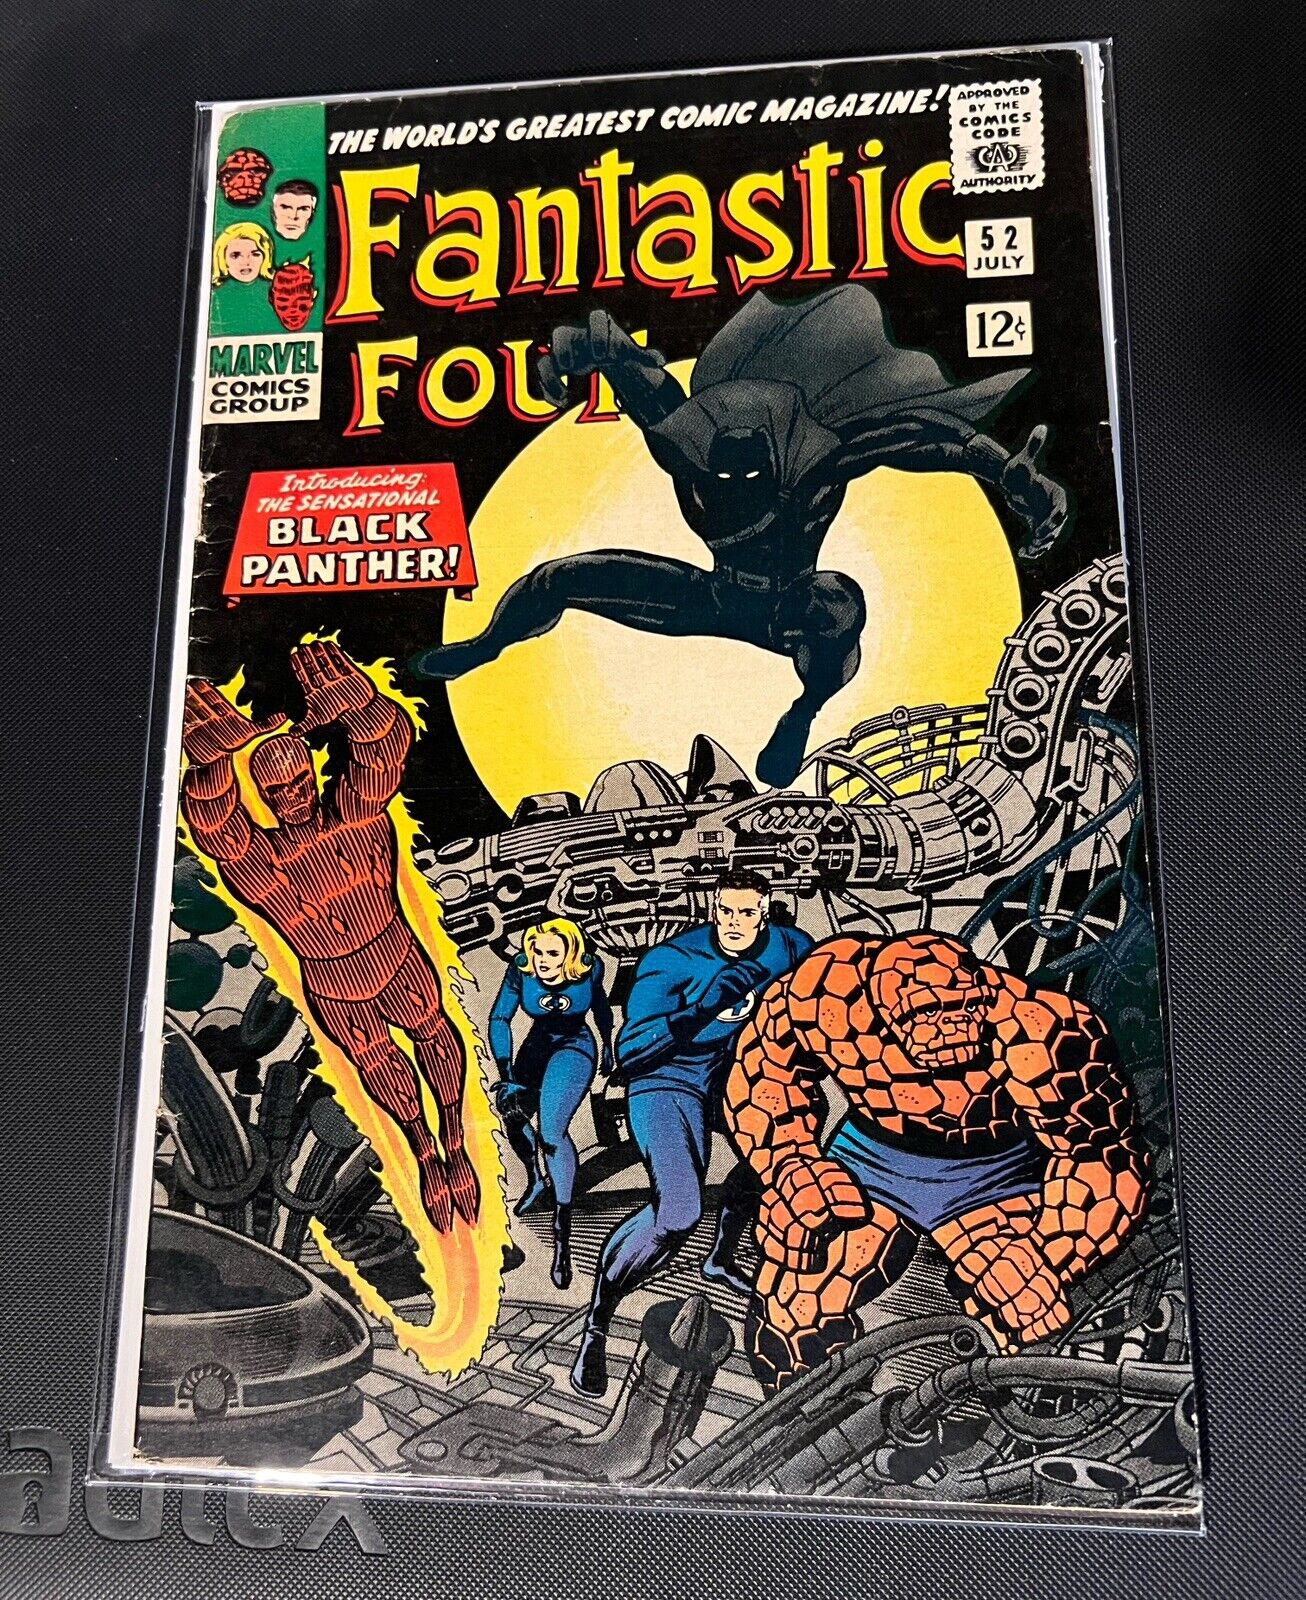 Fantastic Four #52 (1961) - 1st Appearance Of The Black Panther Marvel KEY GRAIL